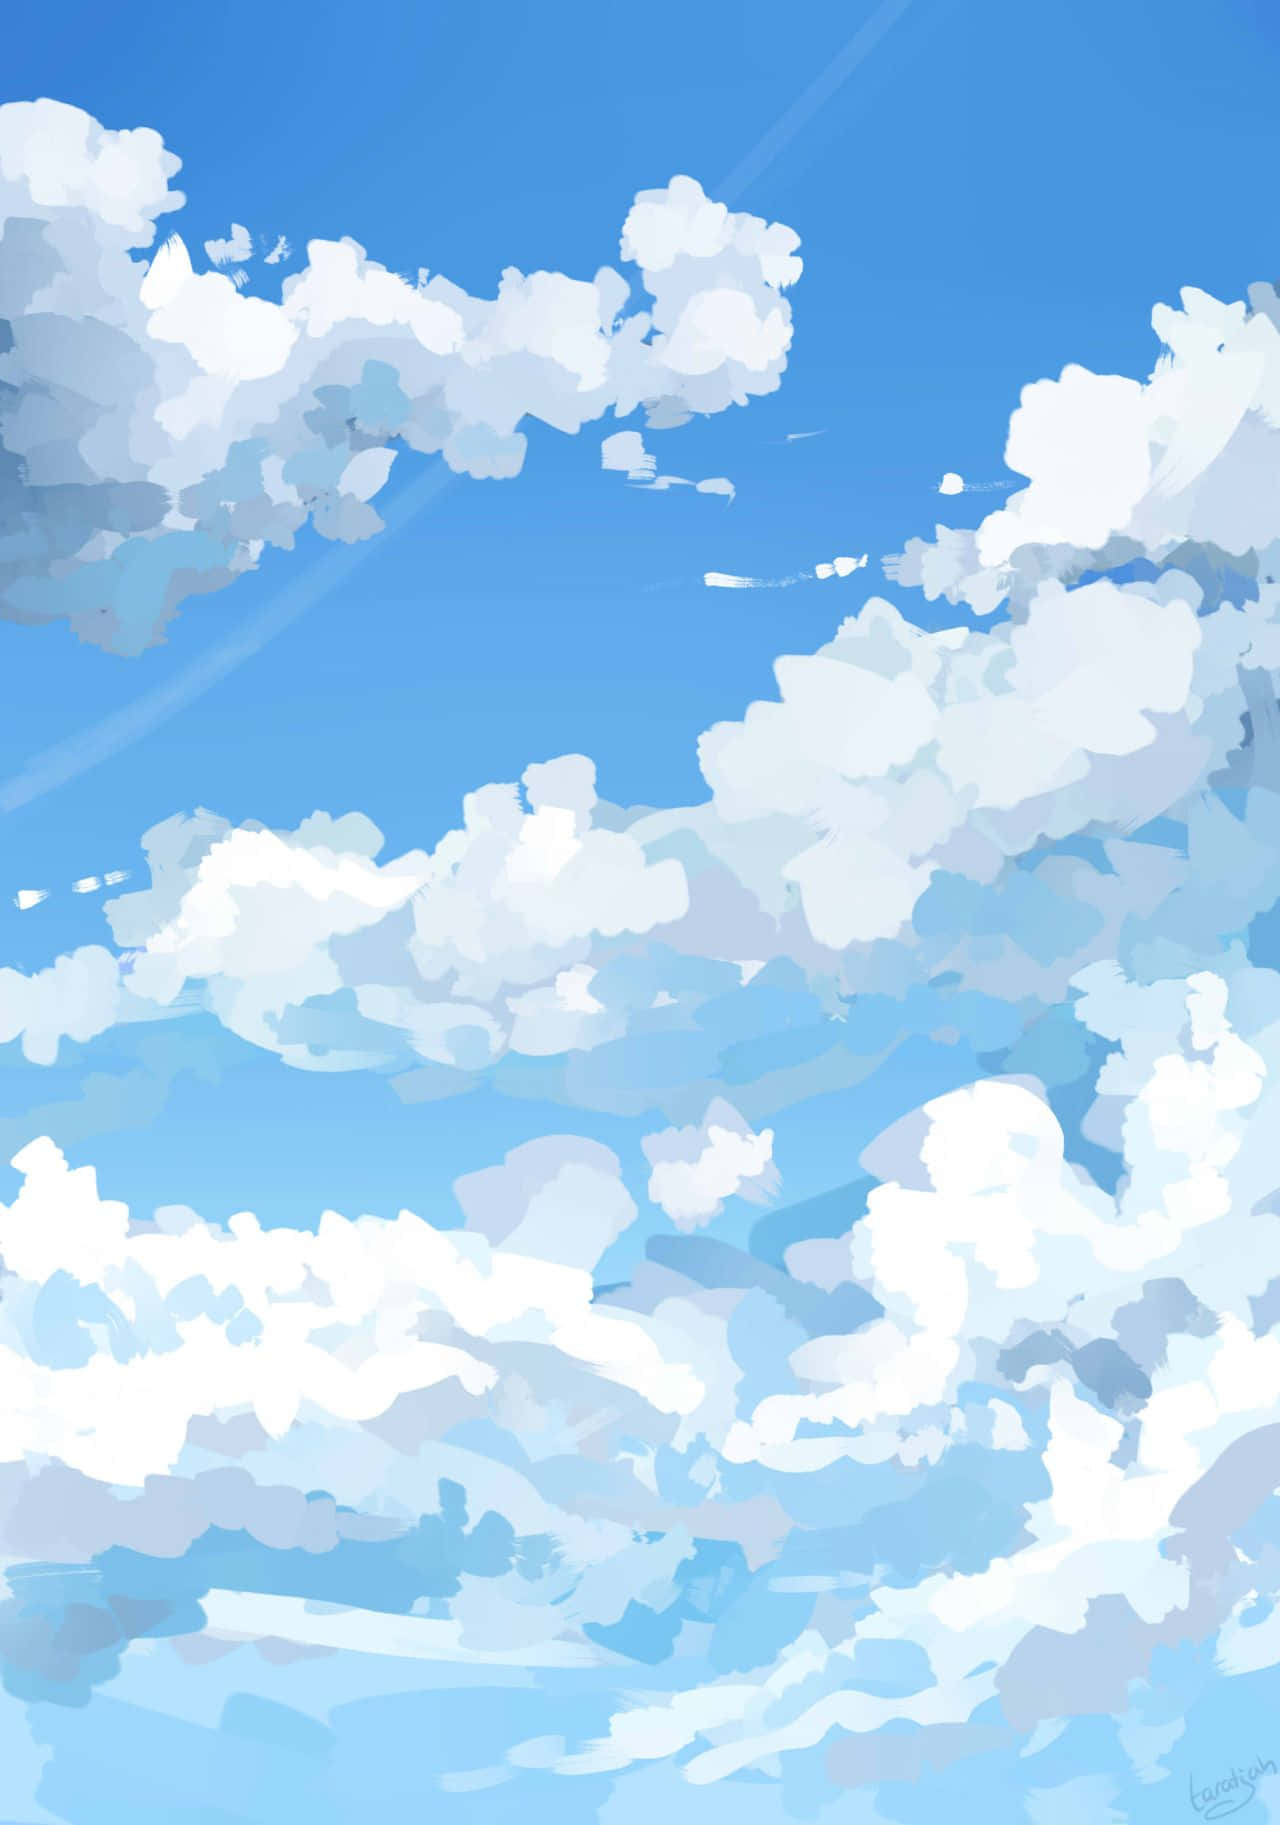 Realistic Cloud Painting Aesthetic Light Blue